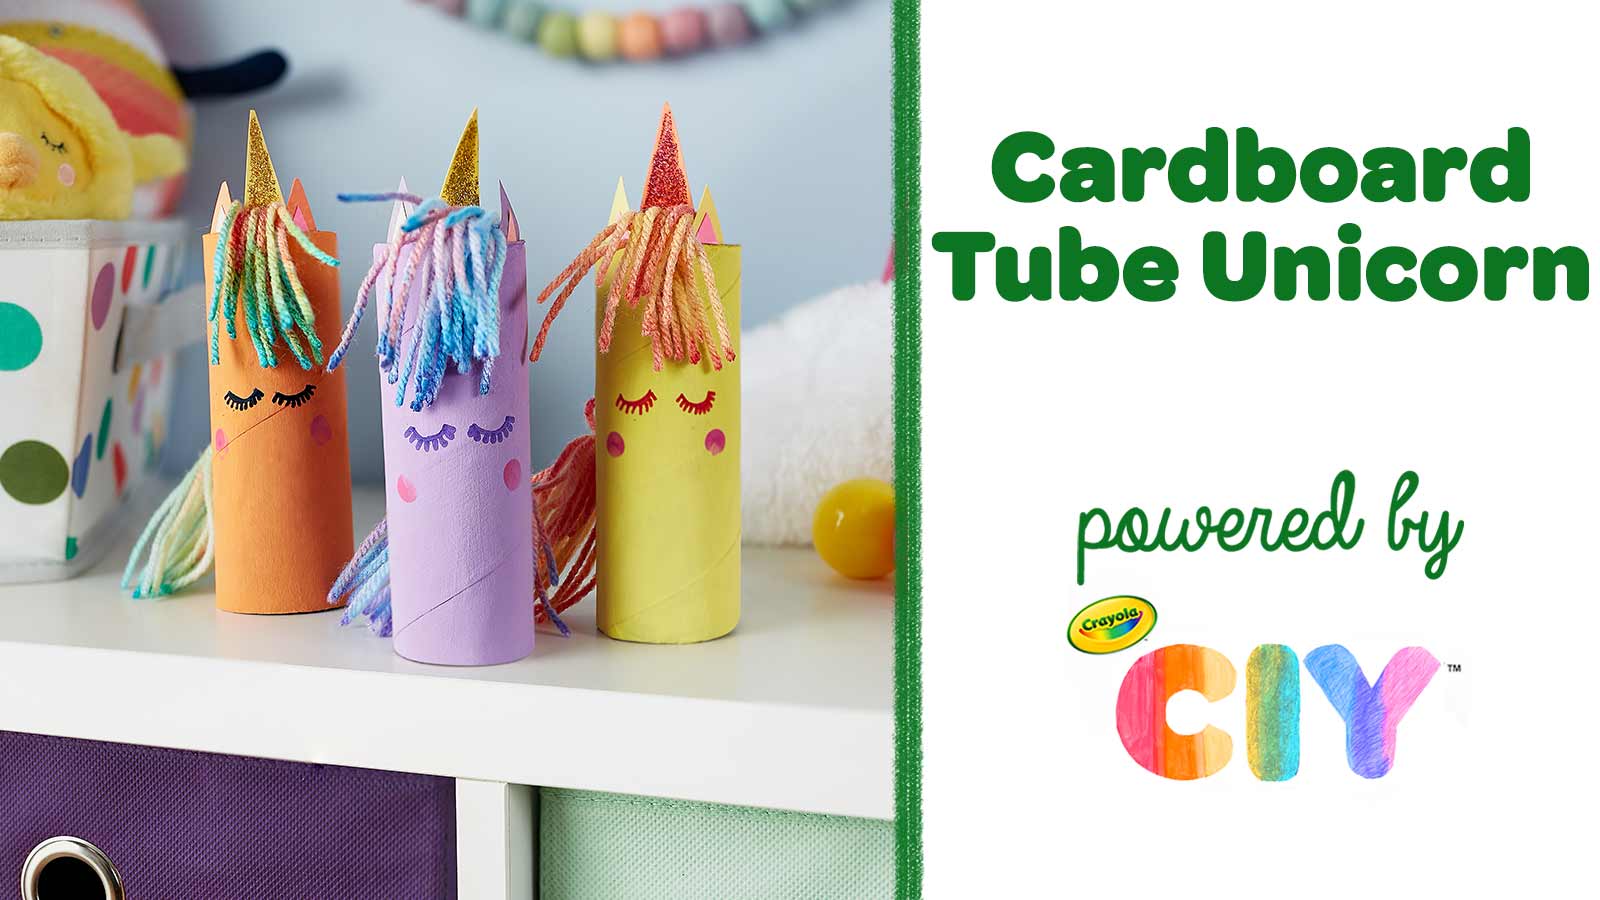 6 FUN CRAFTS TO DO WITH YOUR CHILDREN - EASY CRAFTS WITH CARDBOARD TUBES 